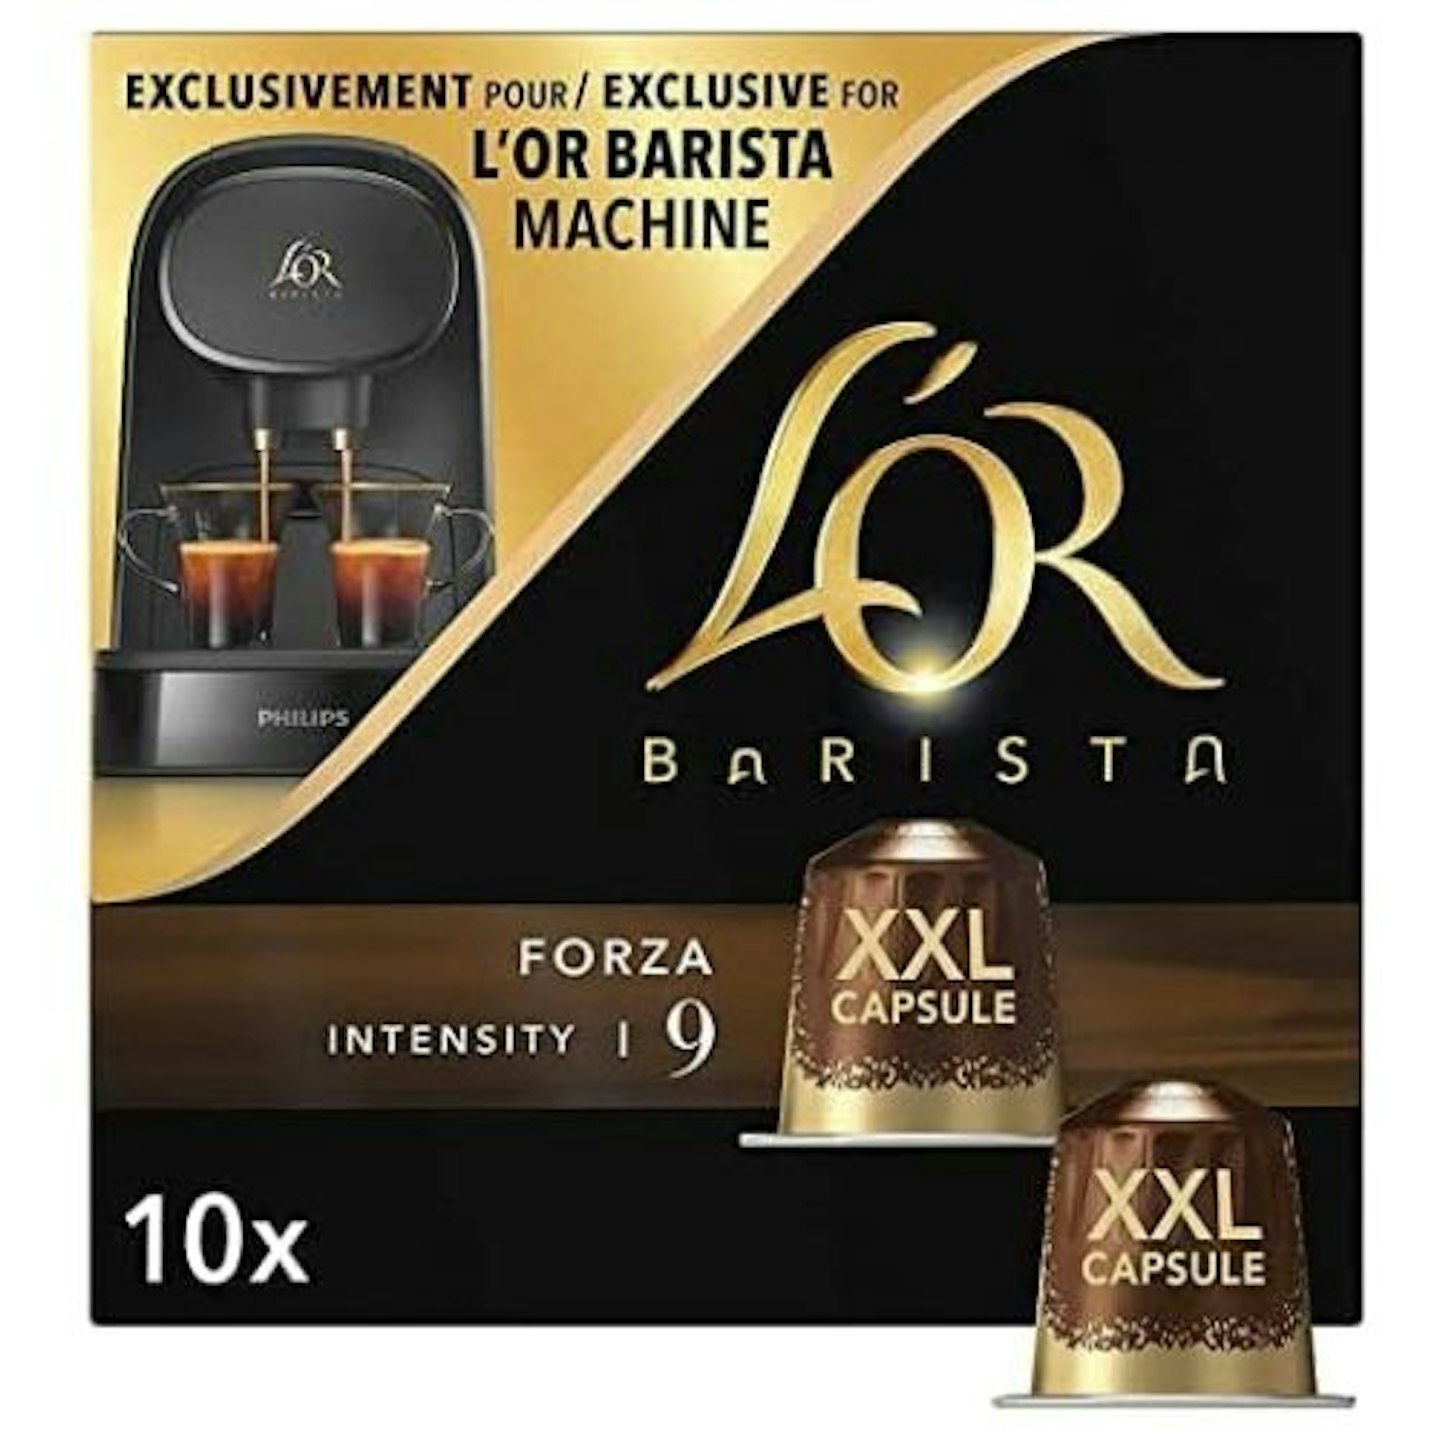 XXL Refillable Stainless Steel Coffee Capsule Pod For LOr Barista